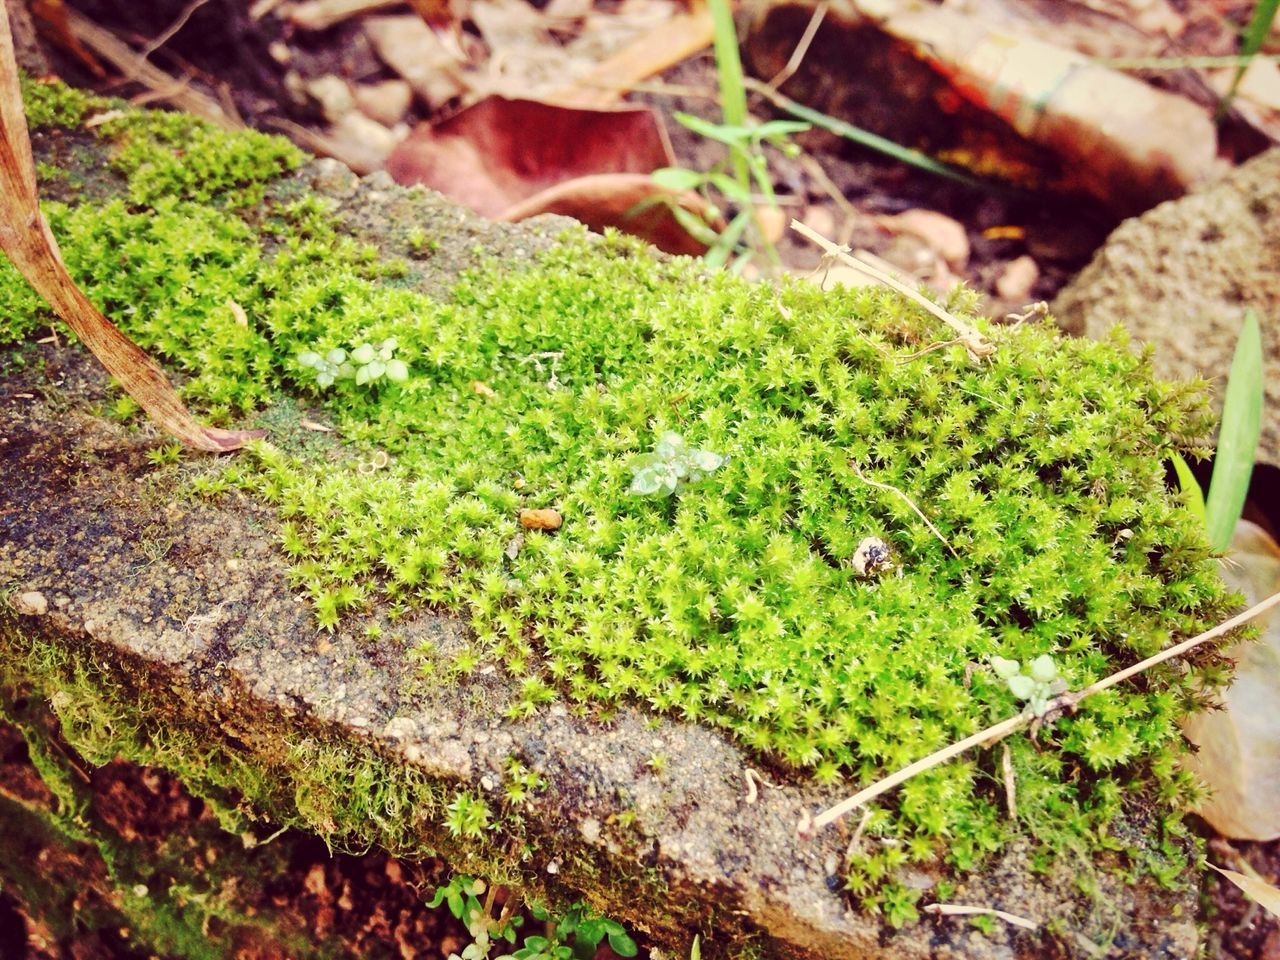 growth, moss, plant, nature, rock - object, high angle view, green color, leaf, forest, growing, rock, tree trunk, close-up, beauty in nature, day, outdoors, tranquility, no people, tree, textured